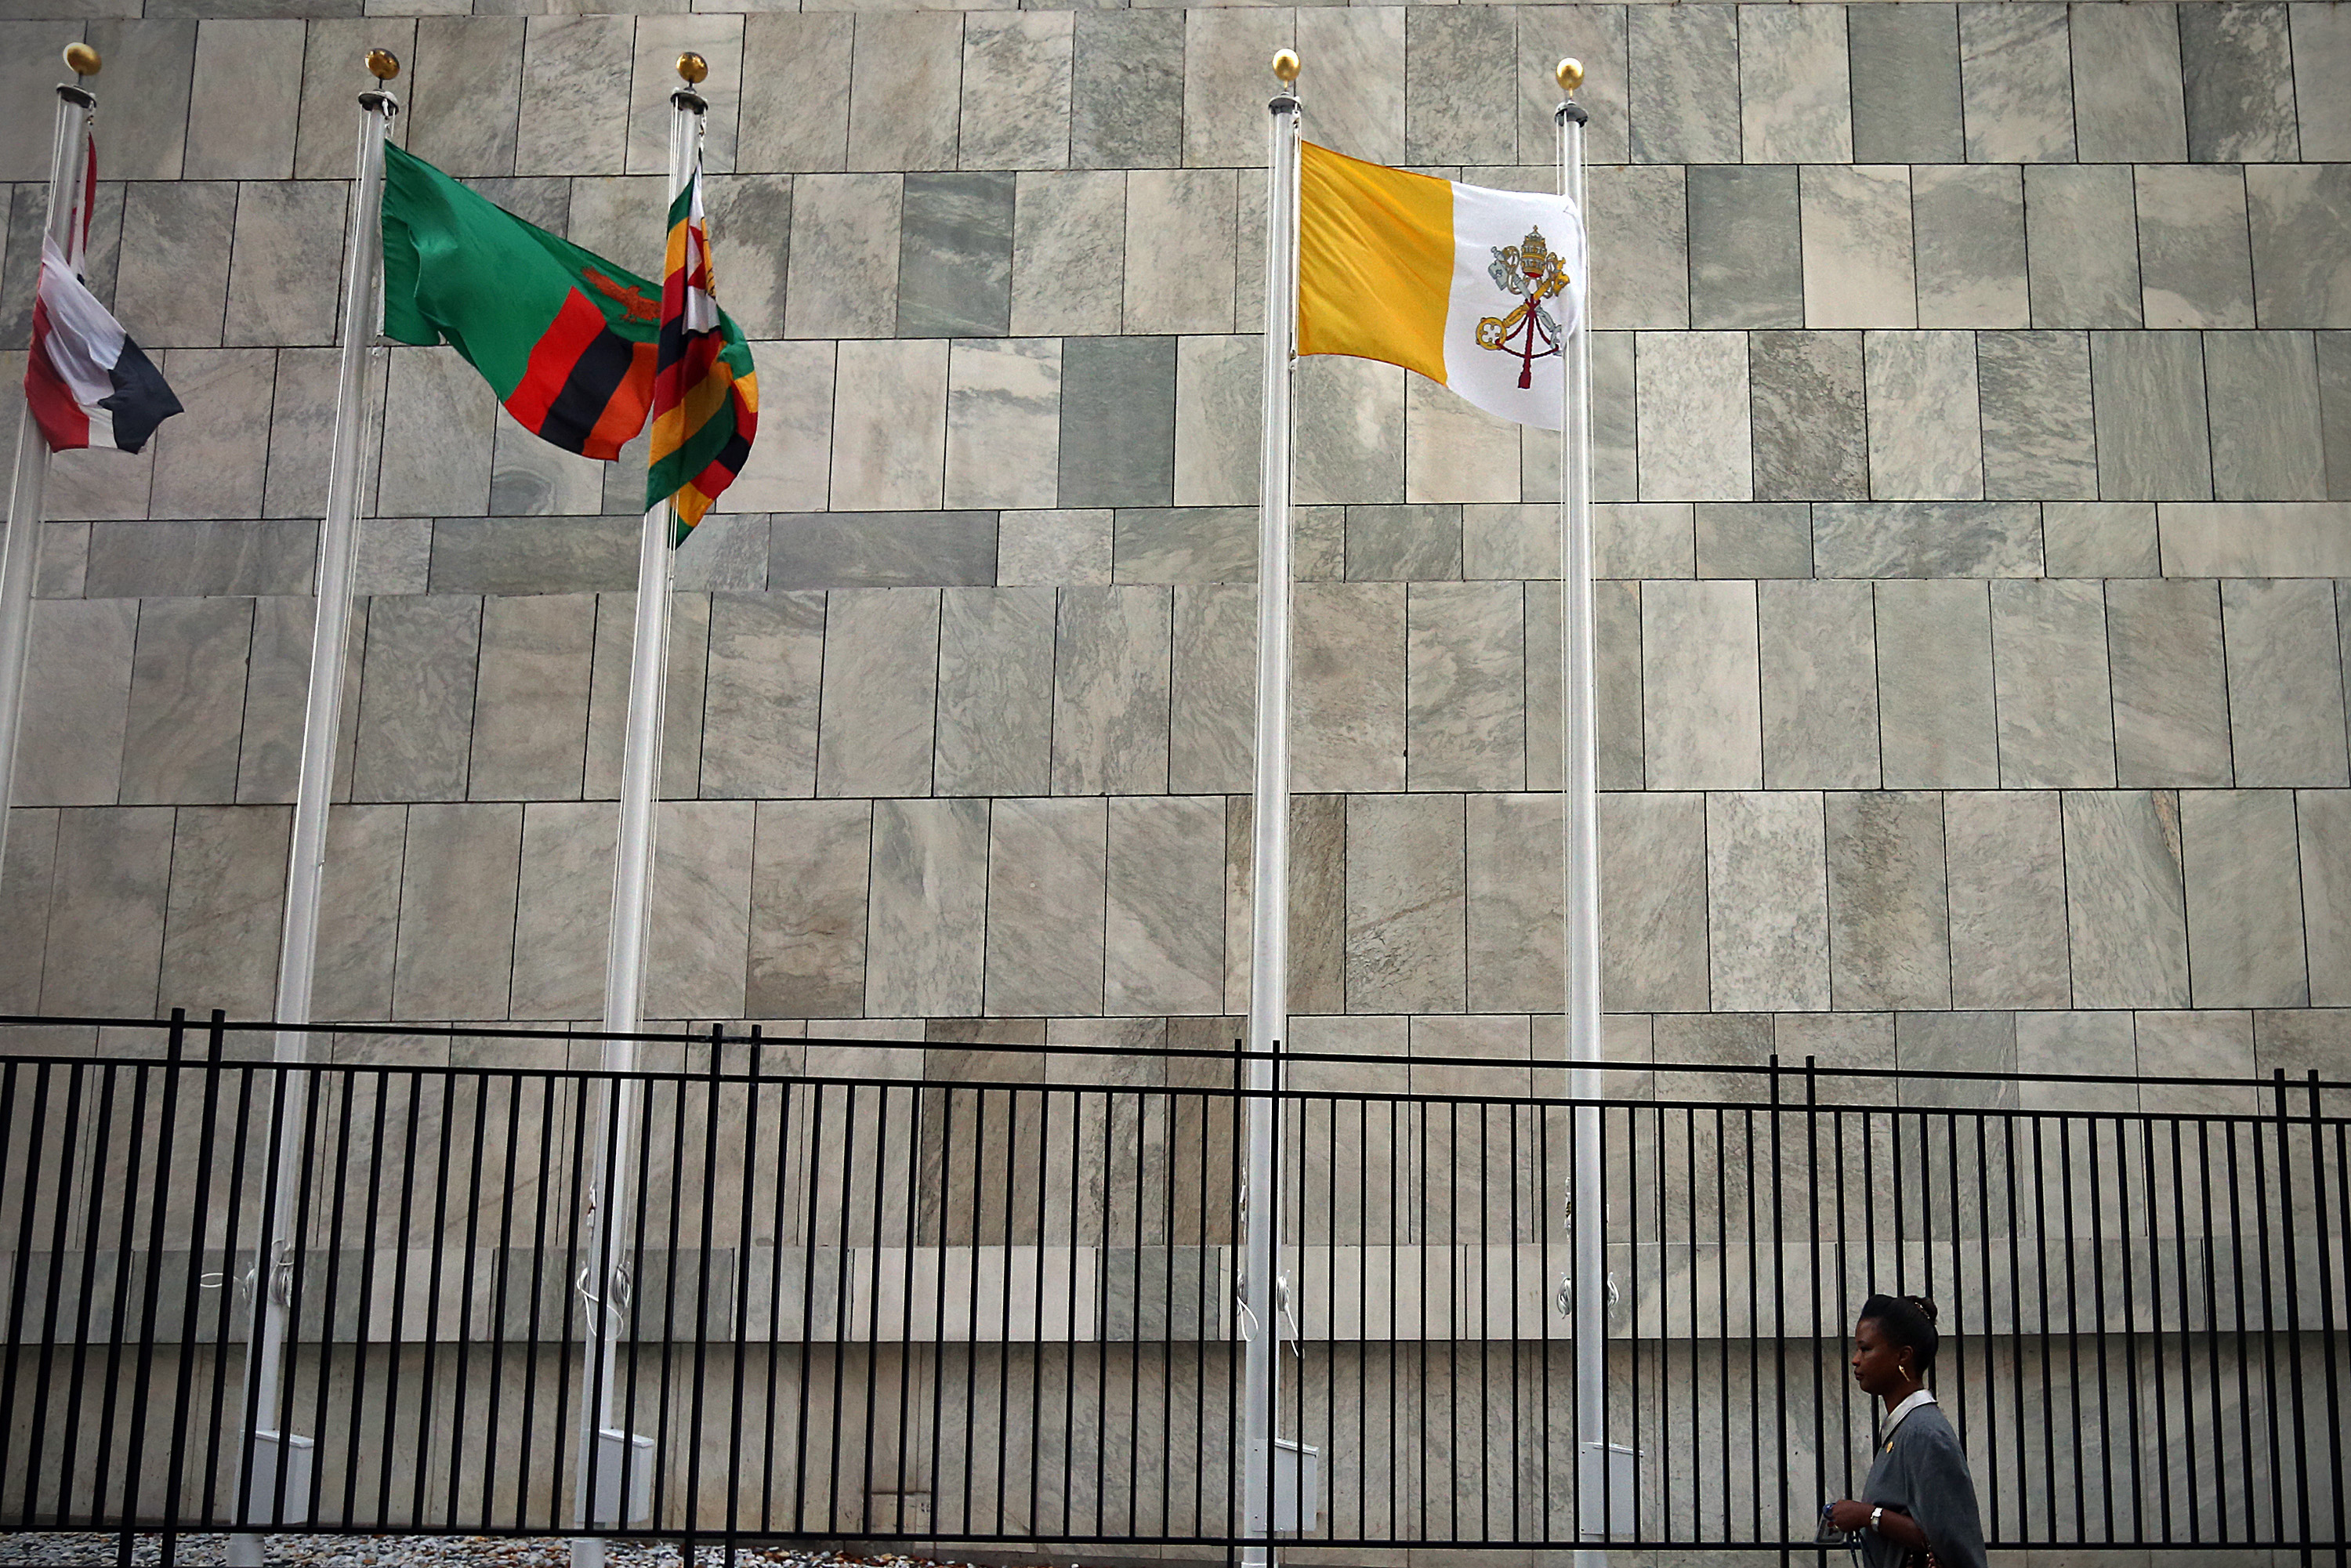 A woman walks past the Vatican flag as it is flown outside the United Nations headquarters on September 25, 2015. (Photo by Carl Court/Getty Images)